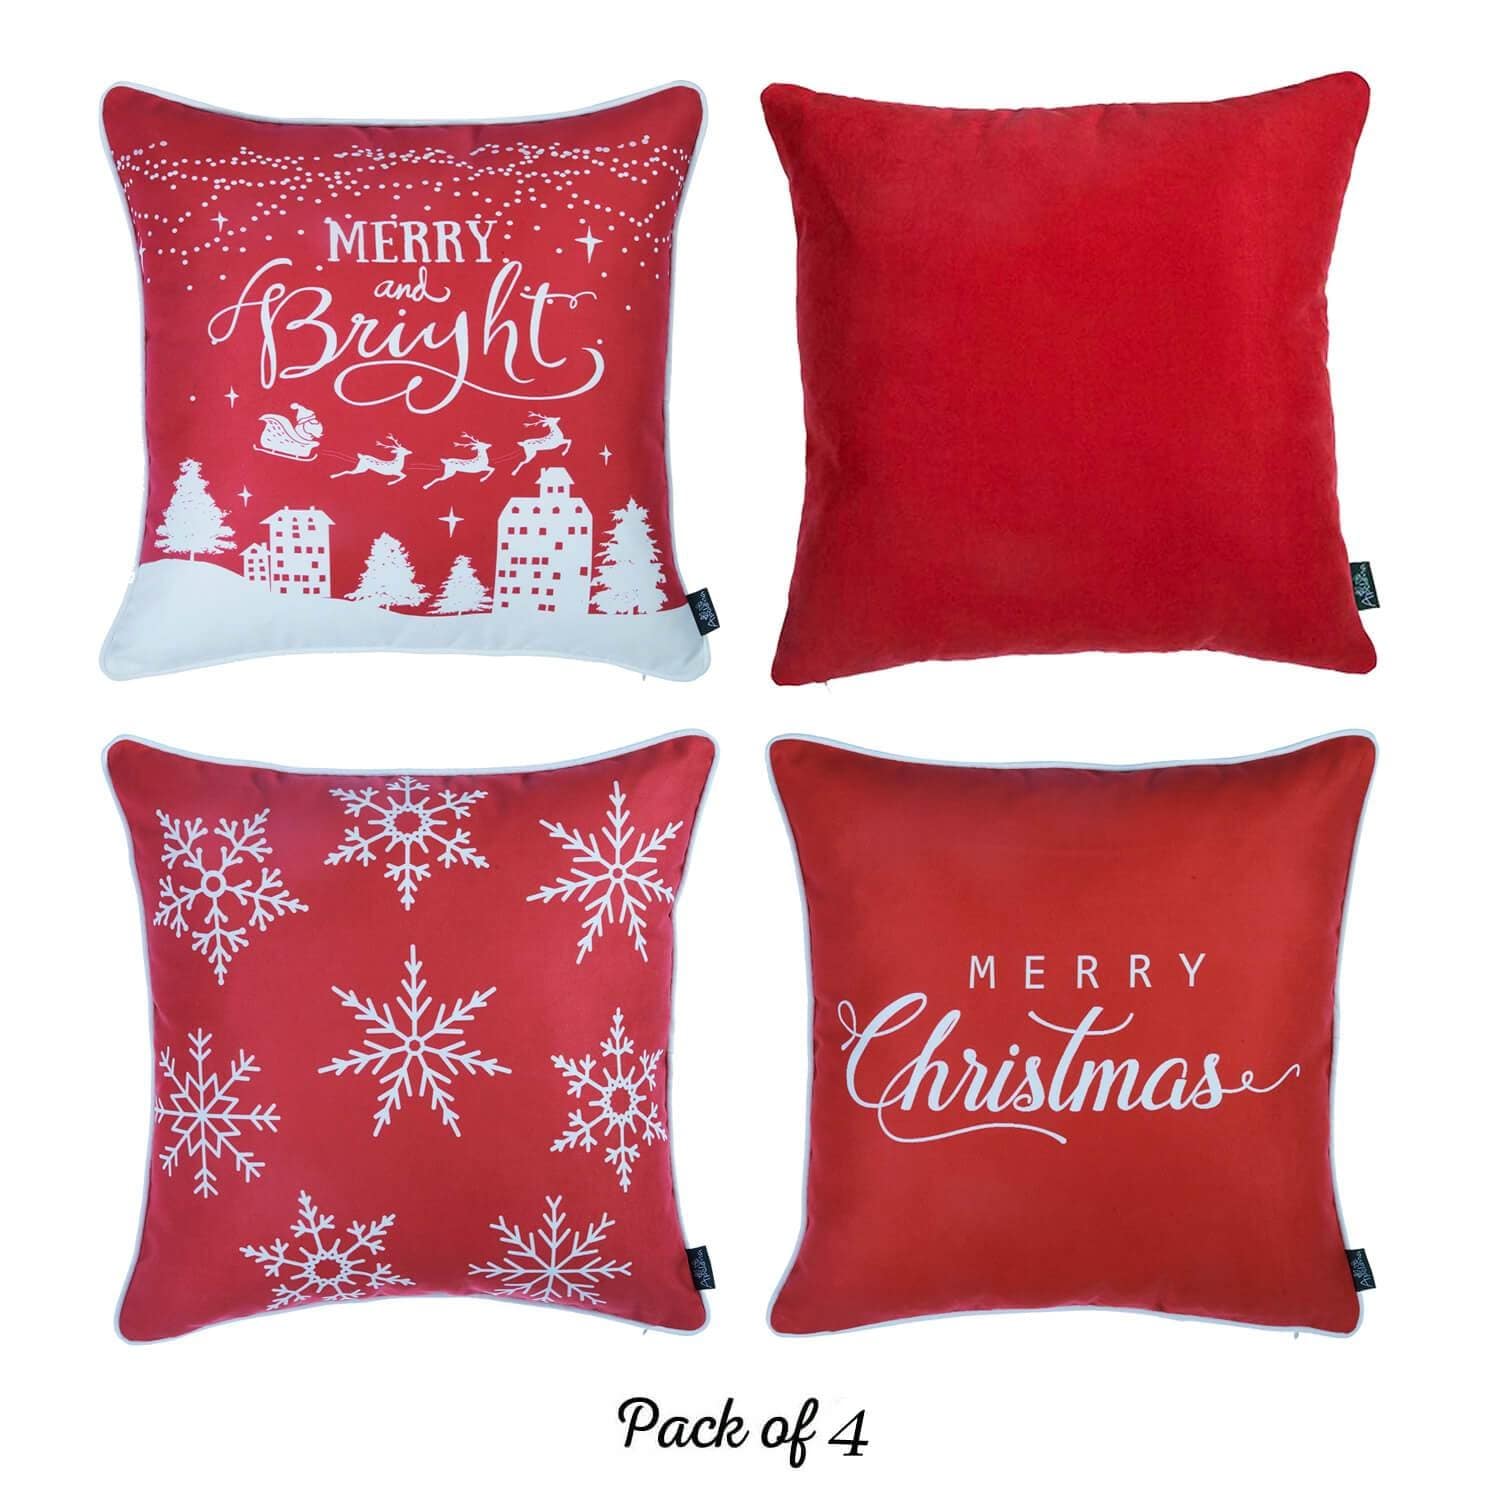 https://ak1.ostkcdn.com/images/products/is/images/direct/3b86d83f3f6ea1eb94c006b6a1b62df8e5bf422f/Merry-Christmas-Set-of-4-Throw-Pillow-Covers-Christmas-Gift-18%22x18%22.jpg